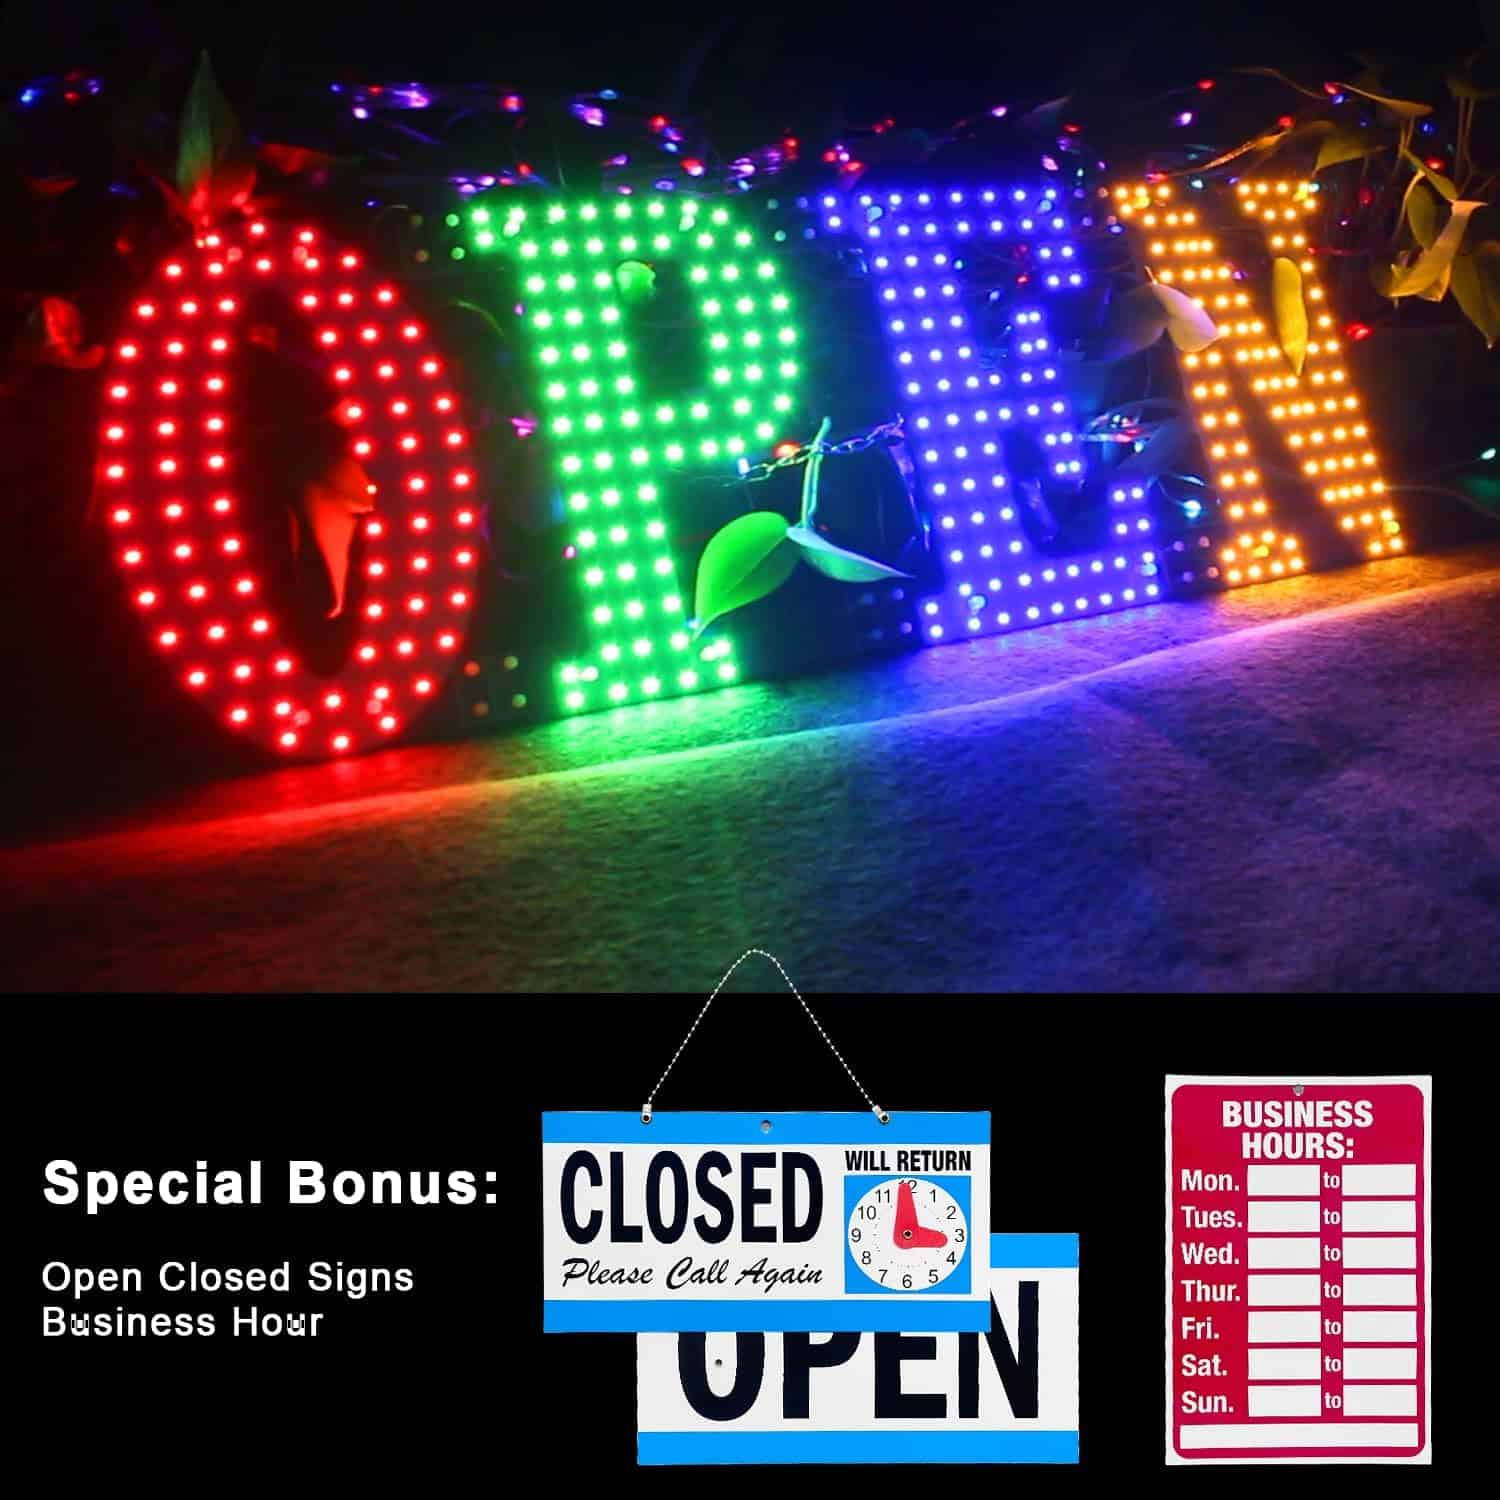 LemonNova Large LED Open Sign for Business 40x14 Super Bright Design LED RGB Open Signs with 13 Scene Modes with Hanging Installation for Window Stores Bar Hotel Shops Salon Restaurant Office